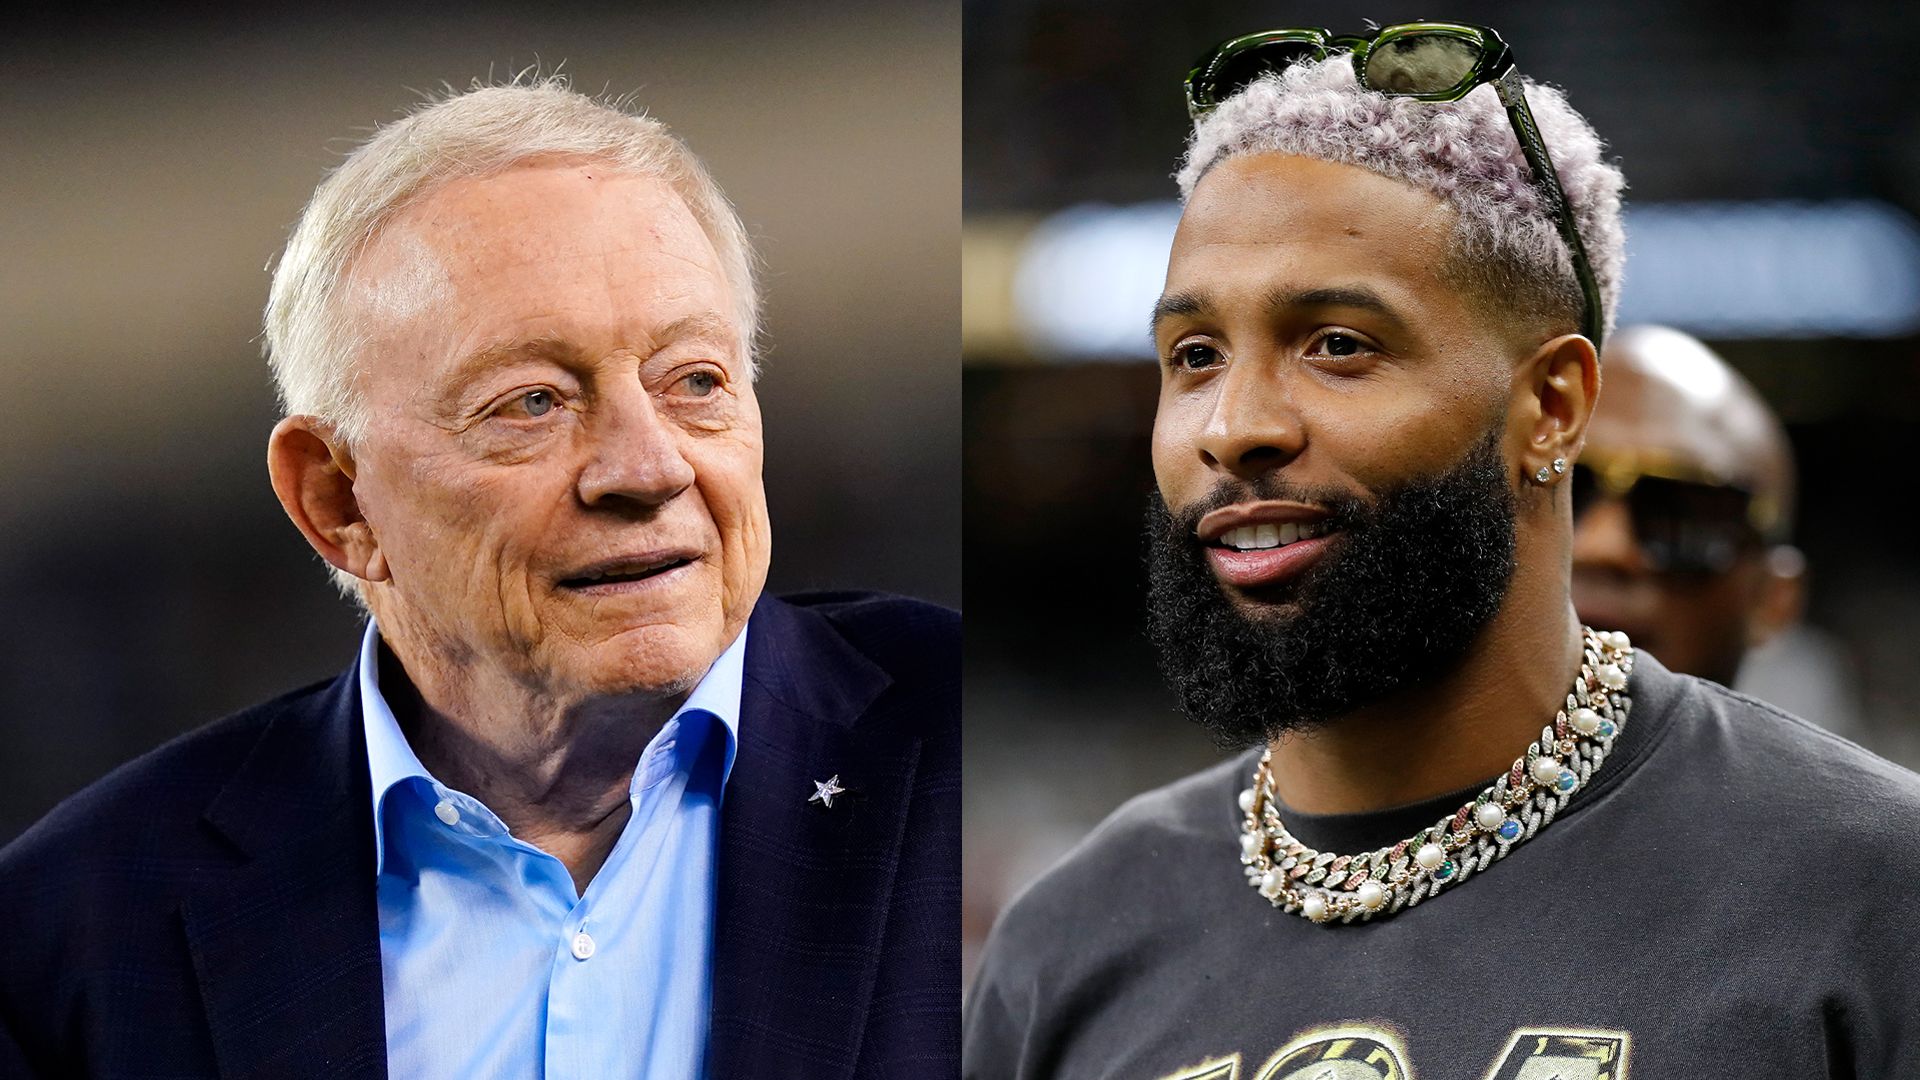 Cowboys owner Jones tells fans to 'stand by' on OBJ decision